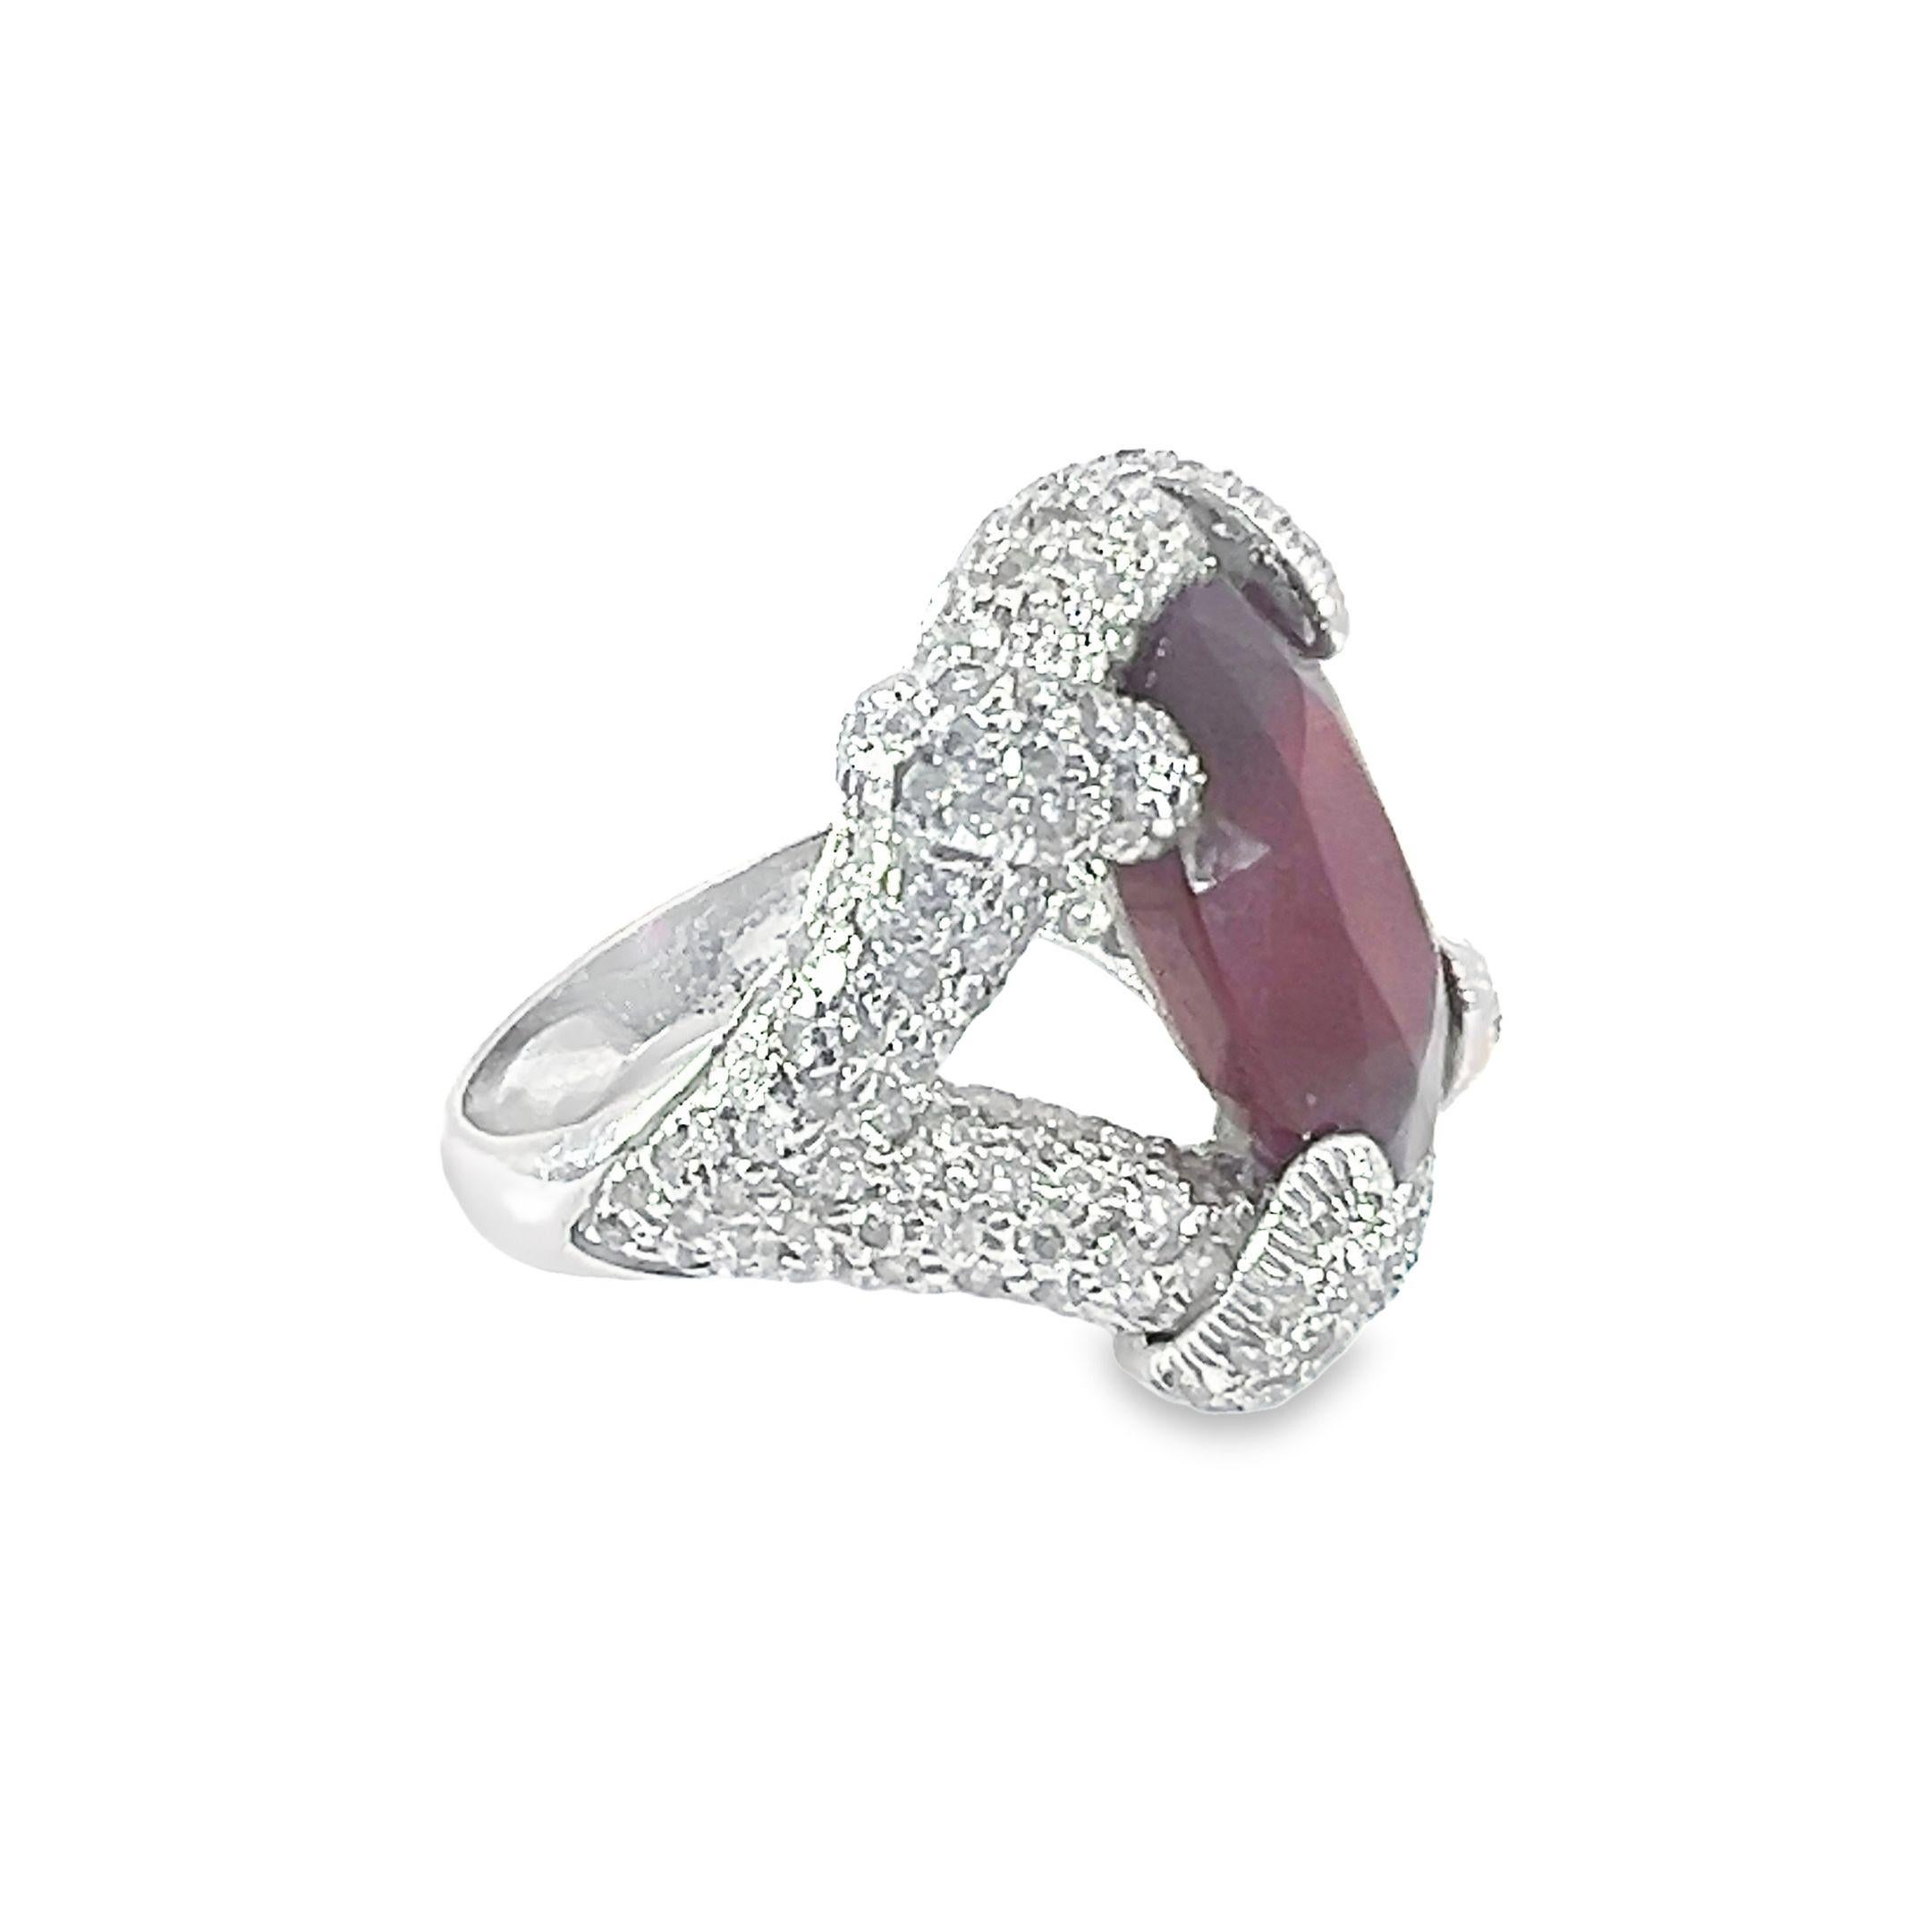 A beautiful natural 10.70-carat oval shaped Glass filled ruby with 2.50-carat diamond ring set in 18-Kt white gold.
This ring has a magnificent ruby at its center, which is delicately framed by a sophisticated arrangement of brilliant diamonds,